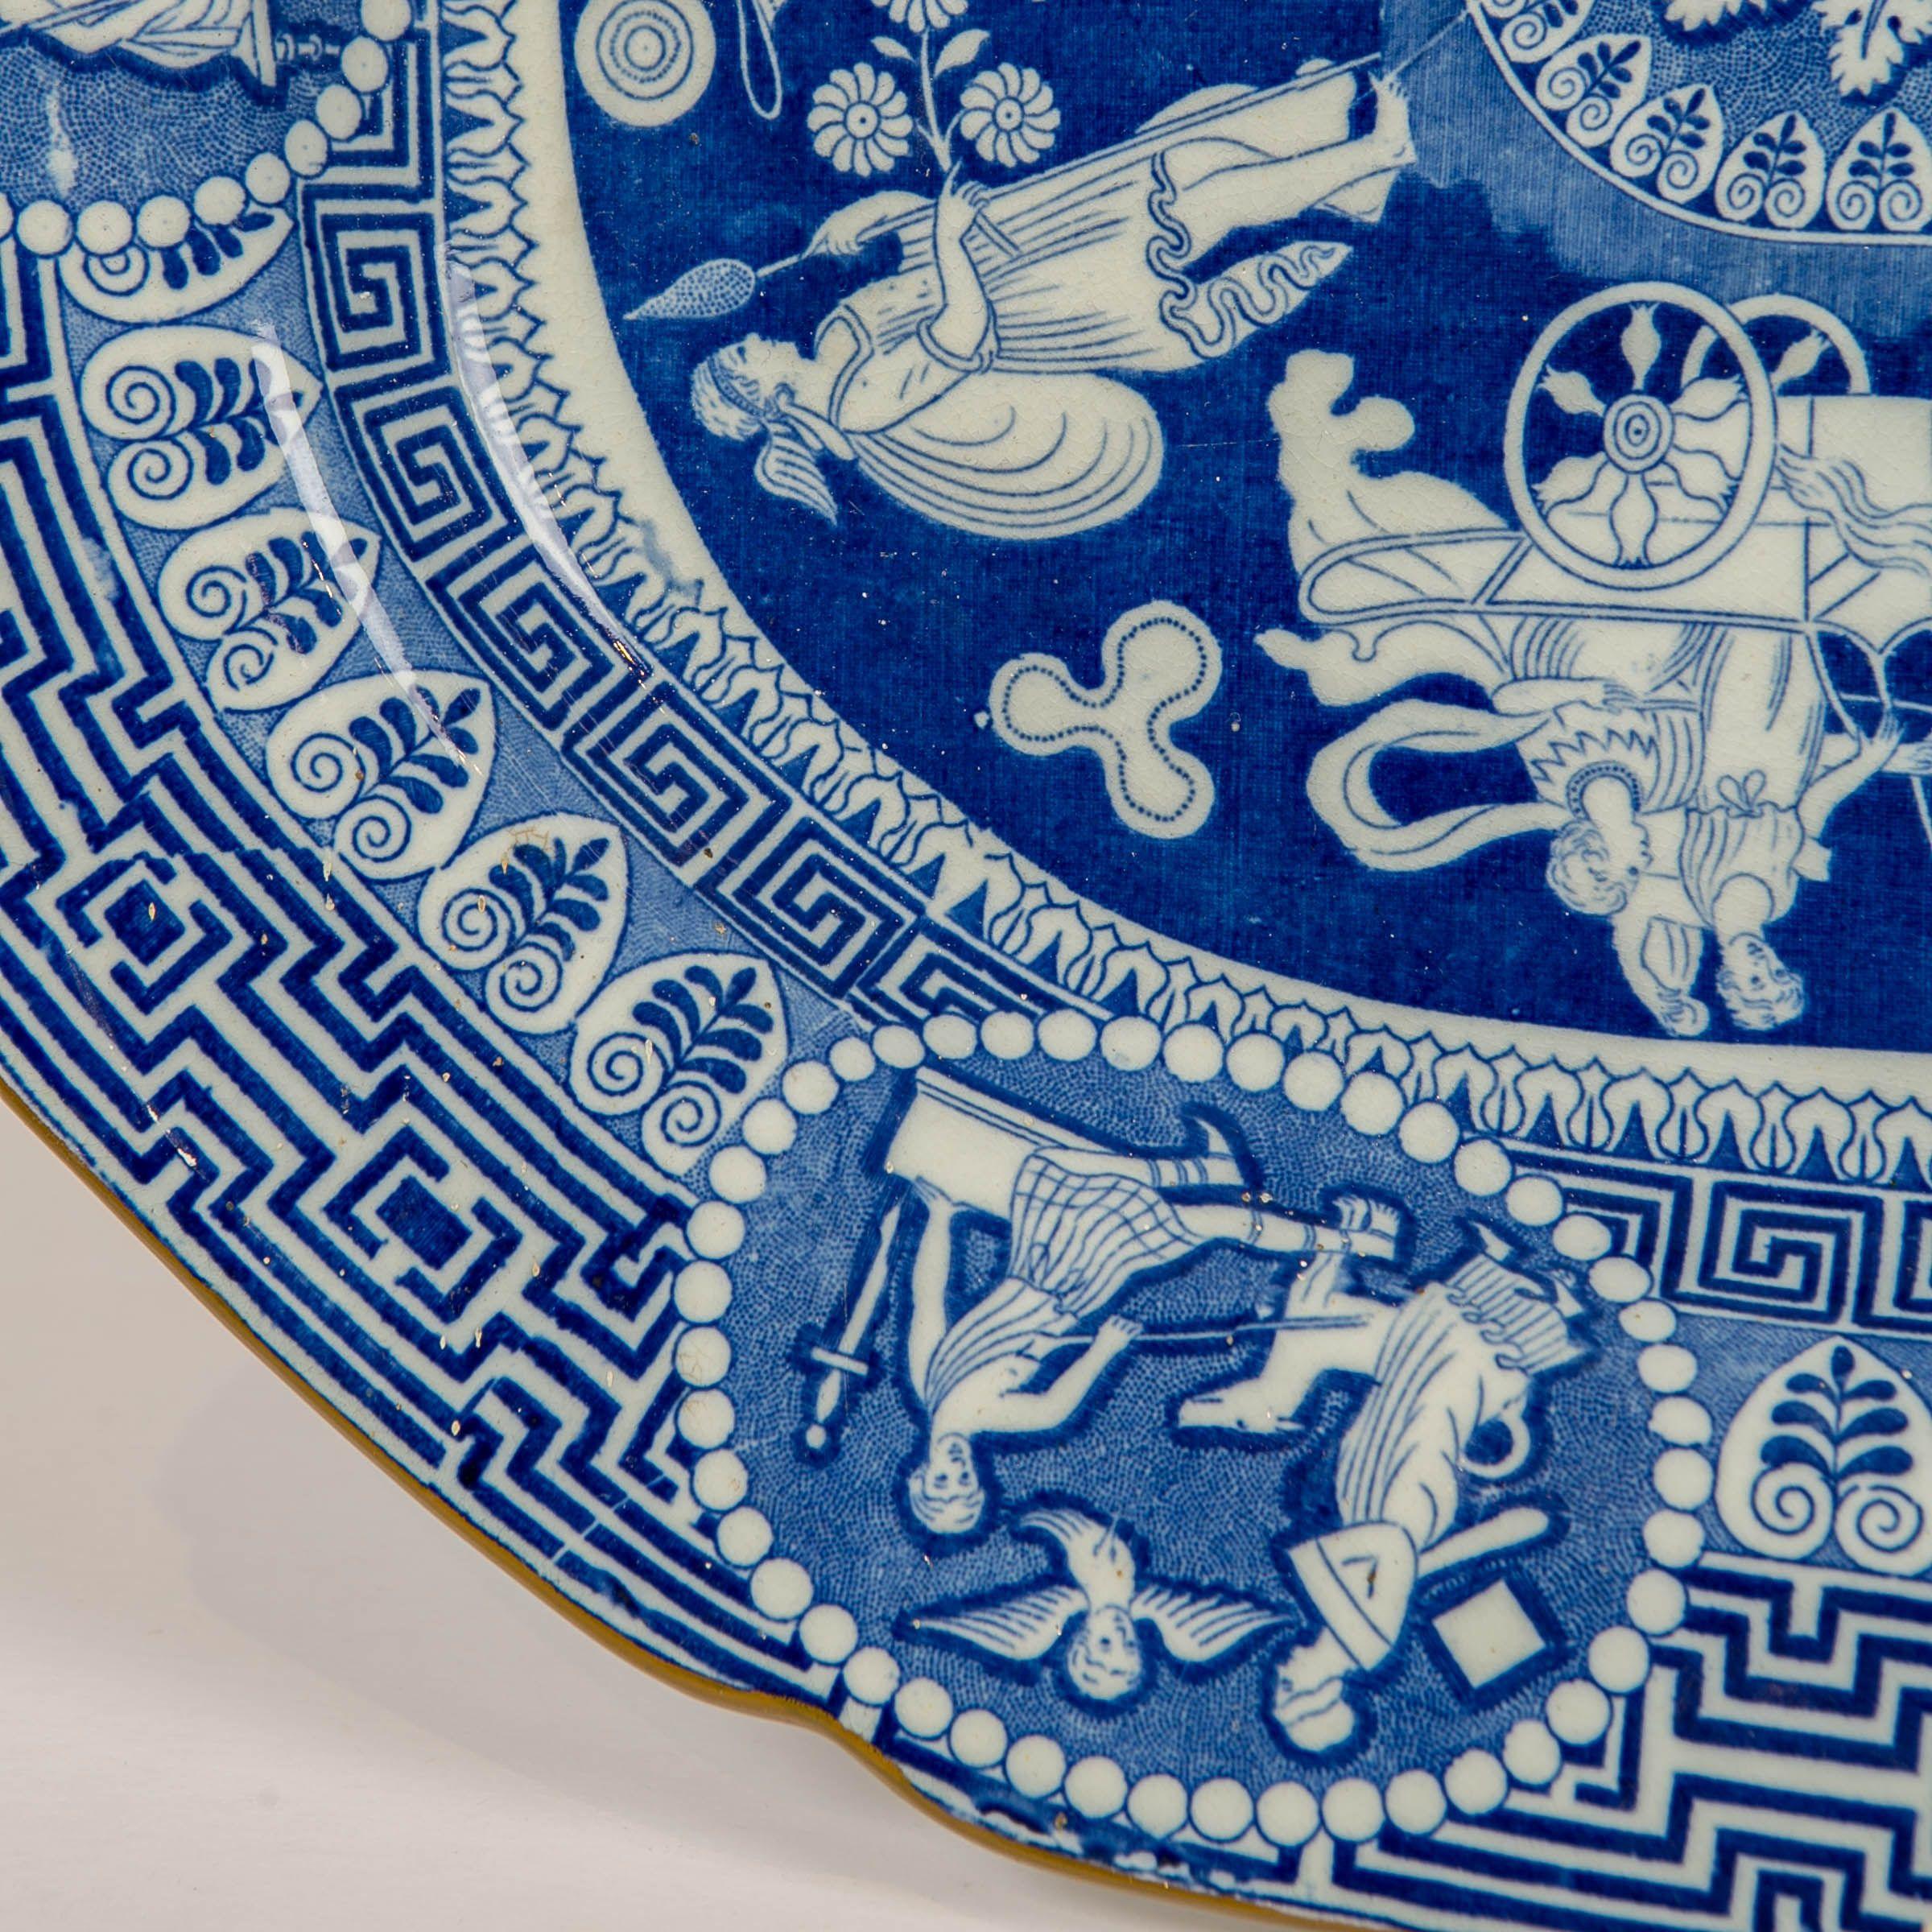 19th Century Large Blue and White Neoclassical Platter Made by Heculaneum in England, c-1810